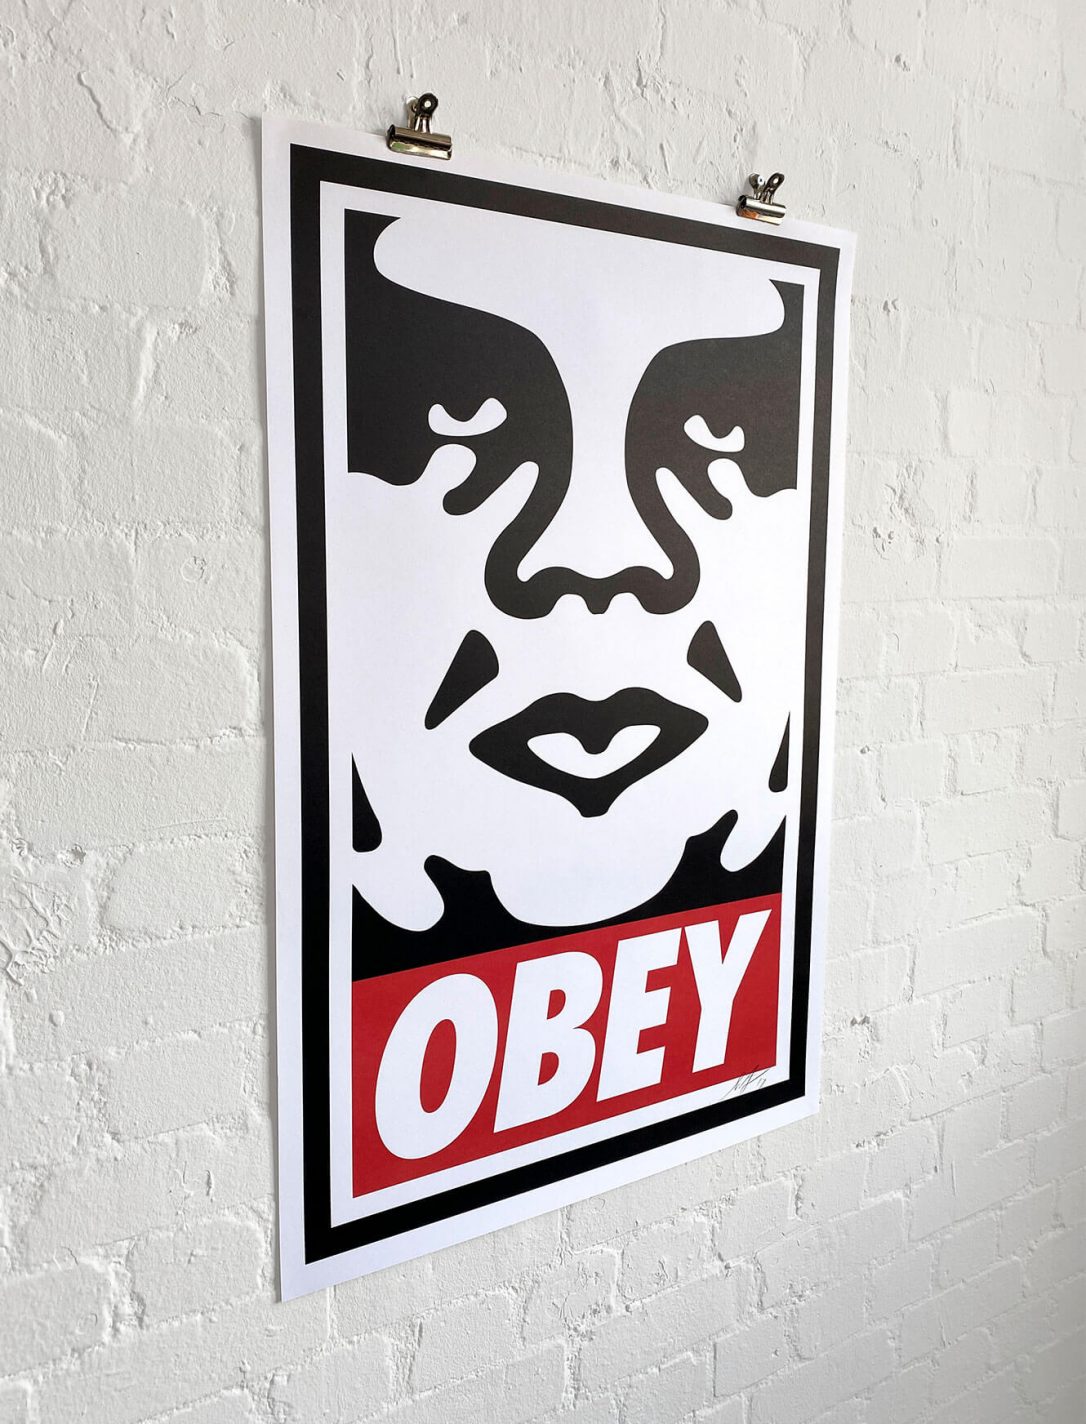 Obey Giant Offset Print by Shepard Fairey - Nelly Duff